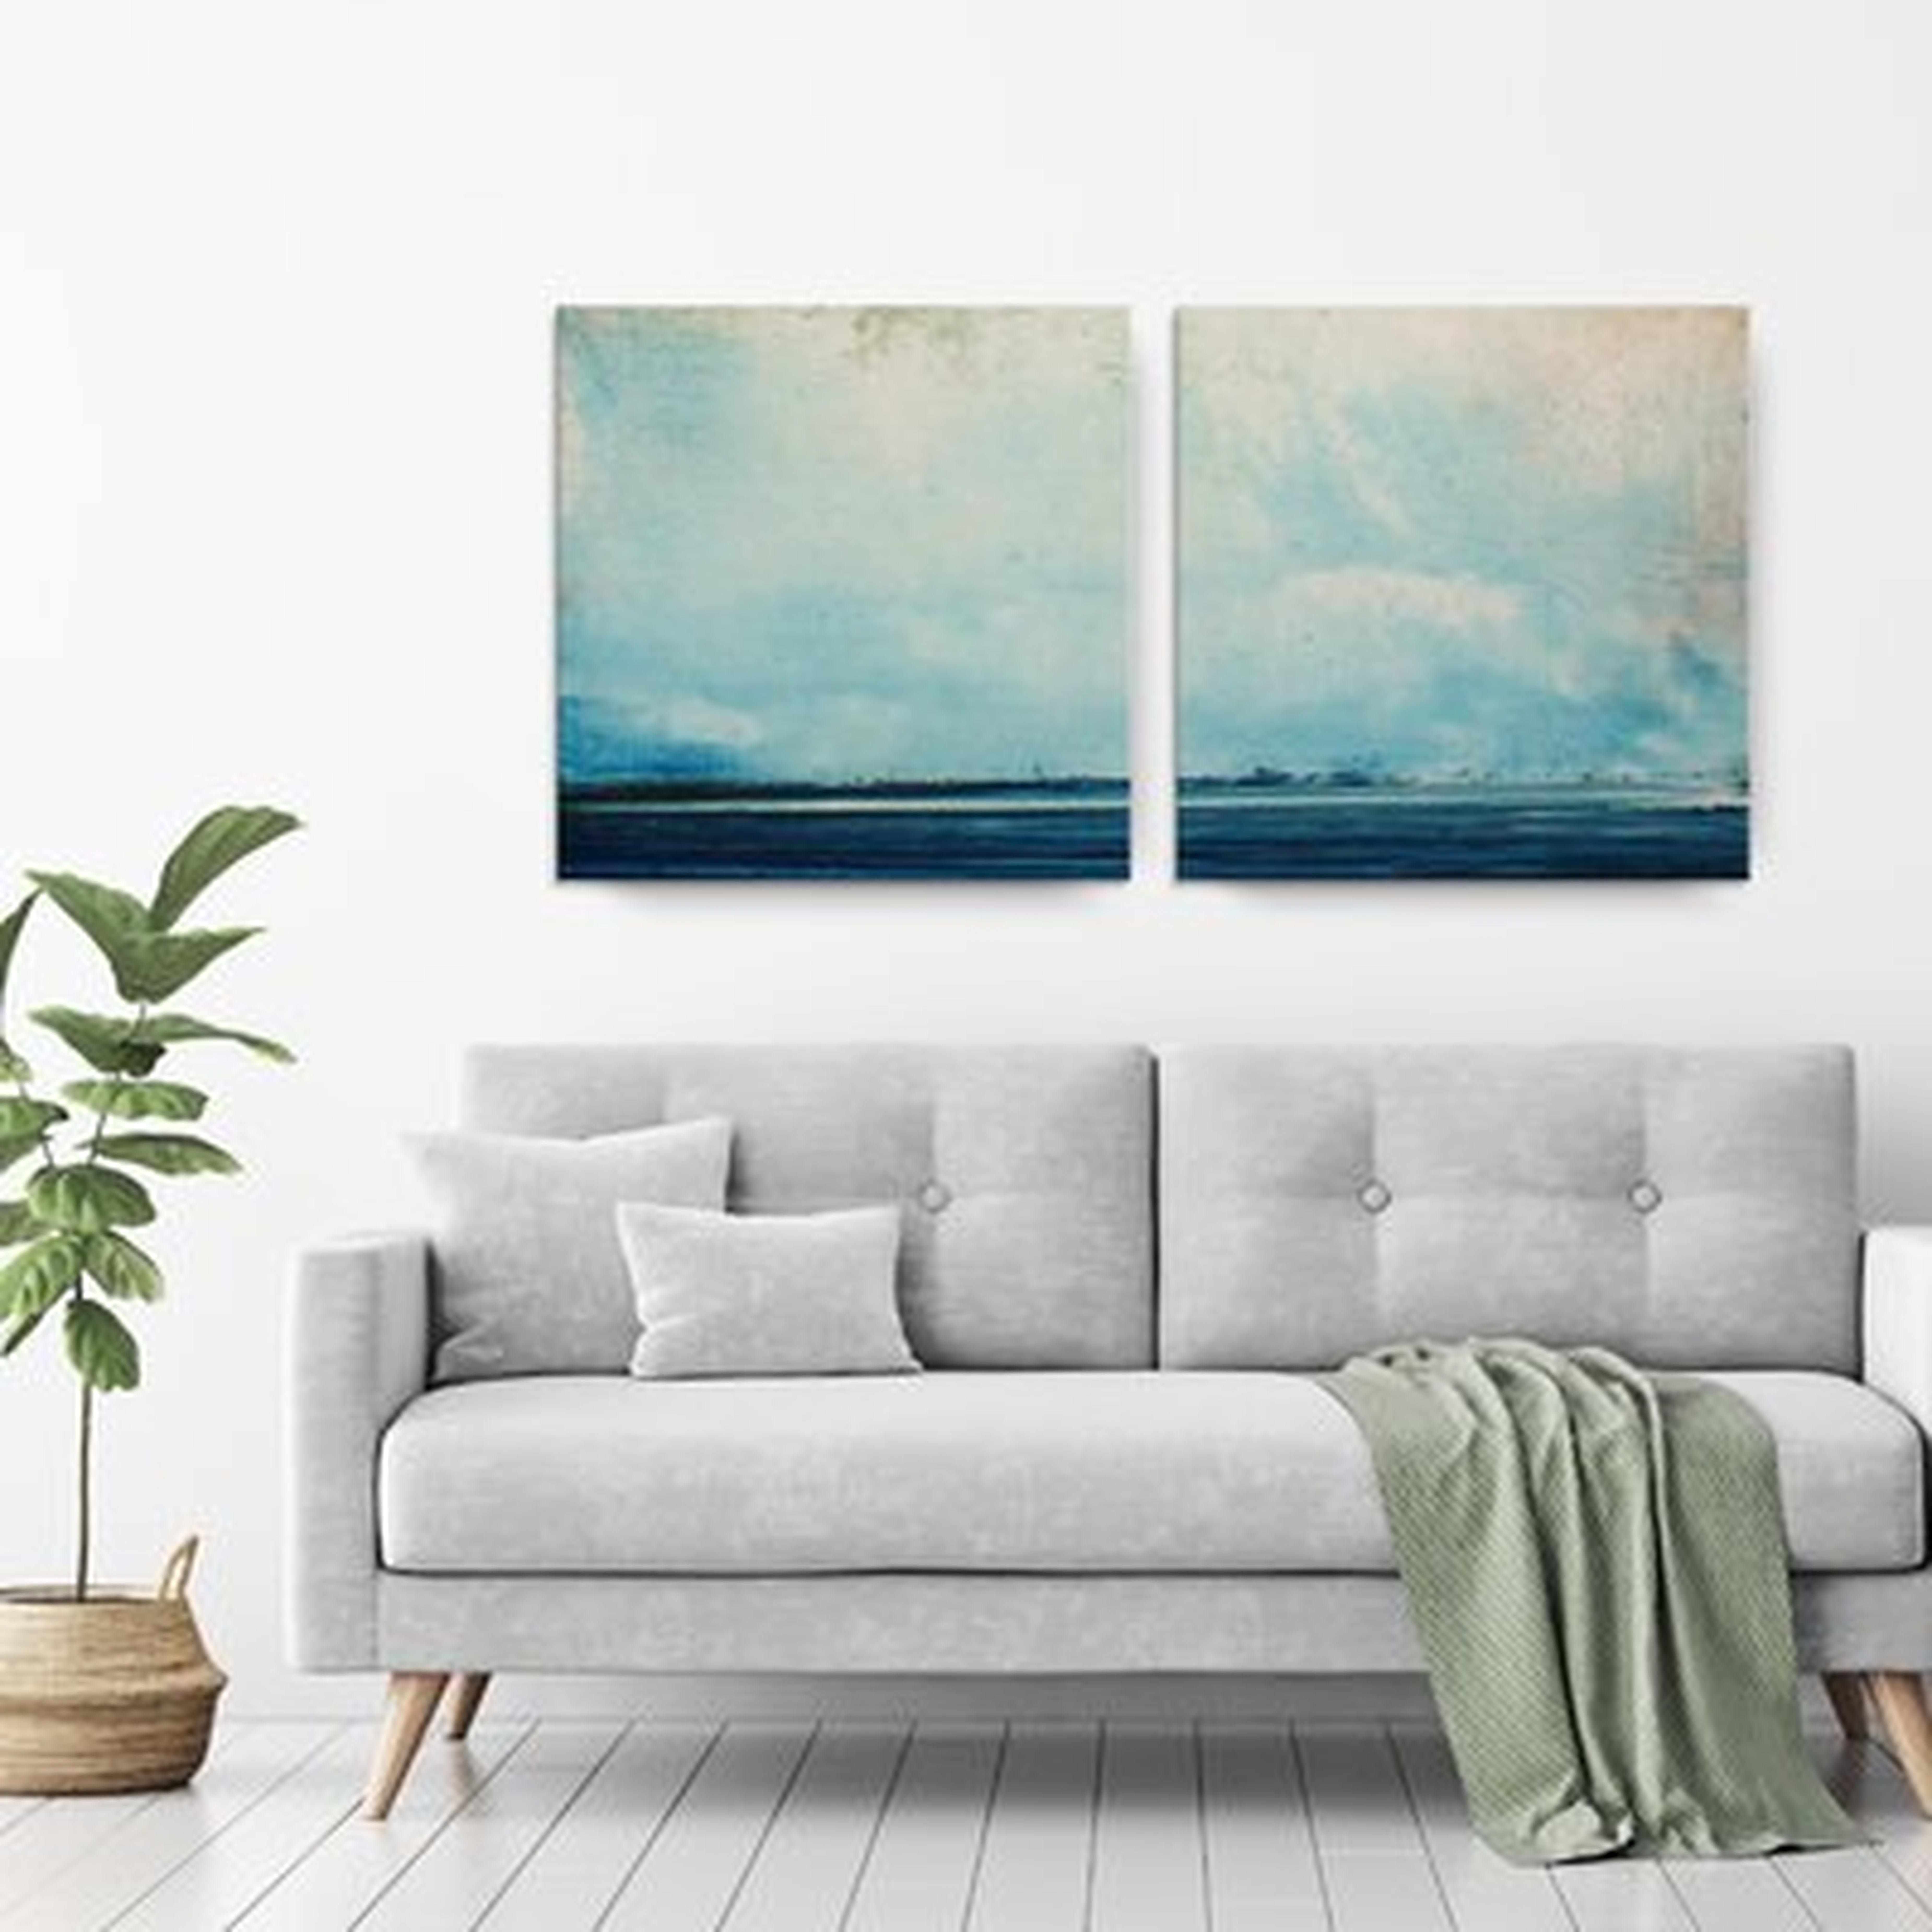 'Abstract Landscape' 2 Piece Wrapped Canvas Print Set on Canvas - Birch Lane